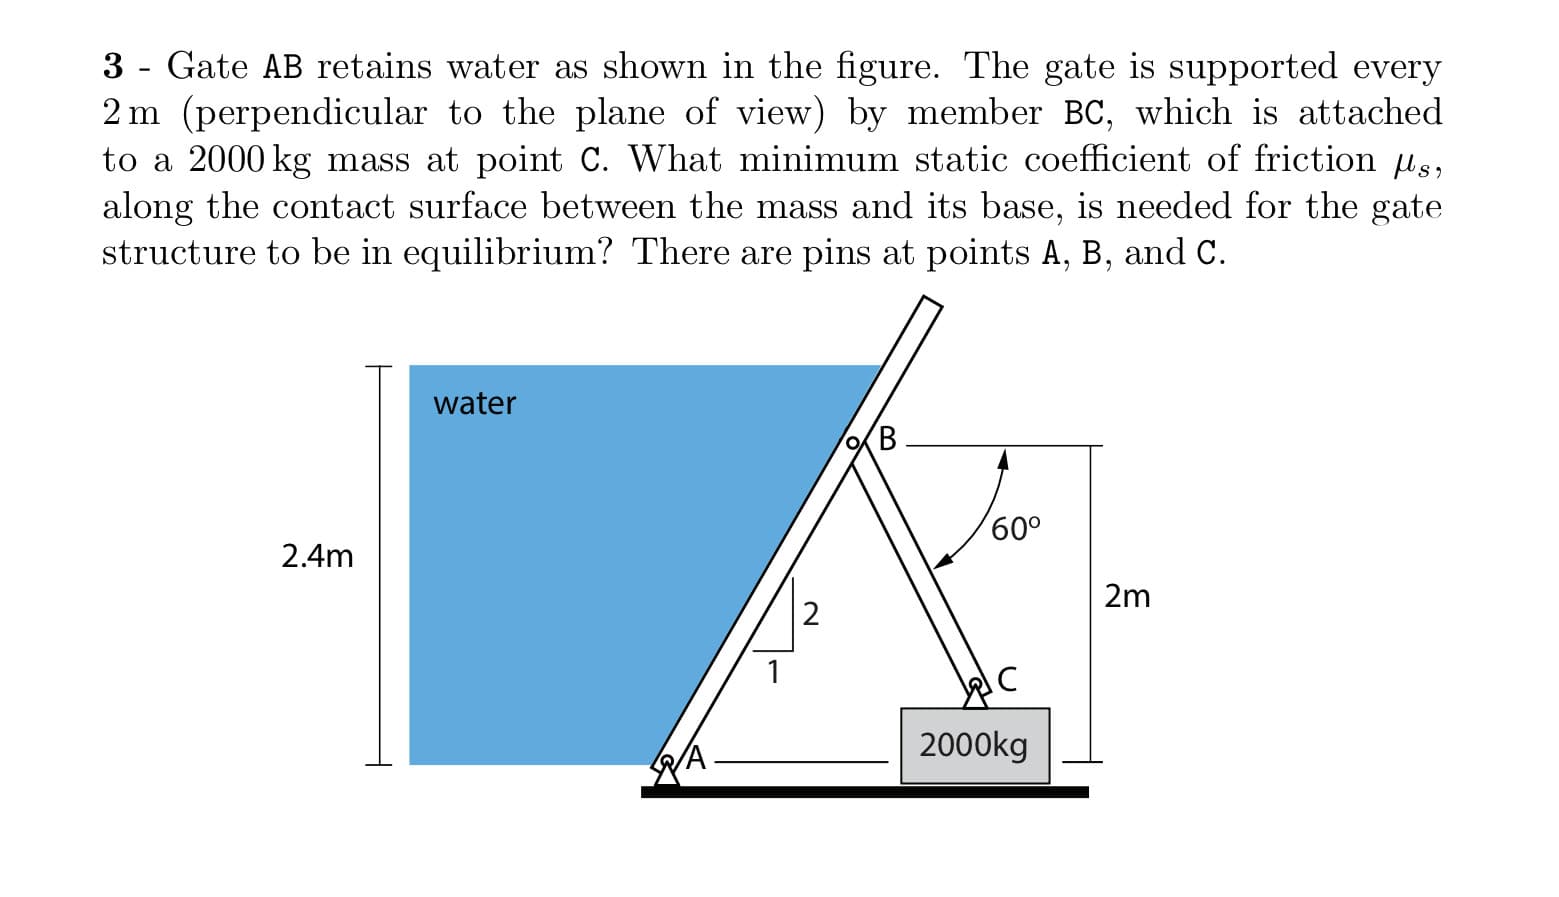 3 - Gate AB retains water as shown in the figure. The gate is supported every
2 m (perpendicular to the plane of view) by member BC, which is attached
to a 2000 kg mass at point C. What minimum static coefficient of friction us,
along the contact surface between the mass and its base, is needed for the gate
structure to be in equilibrium? There are pins at points A, B, and C.
